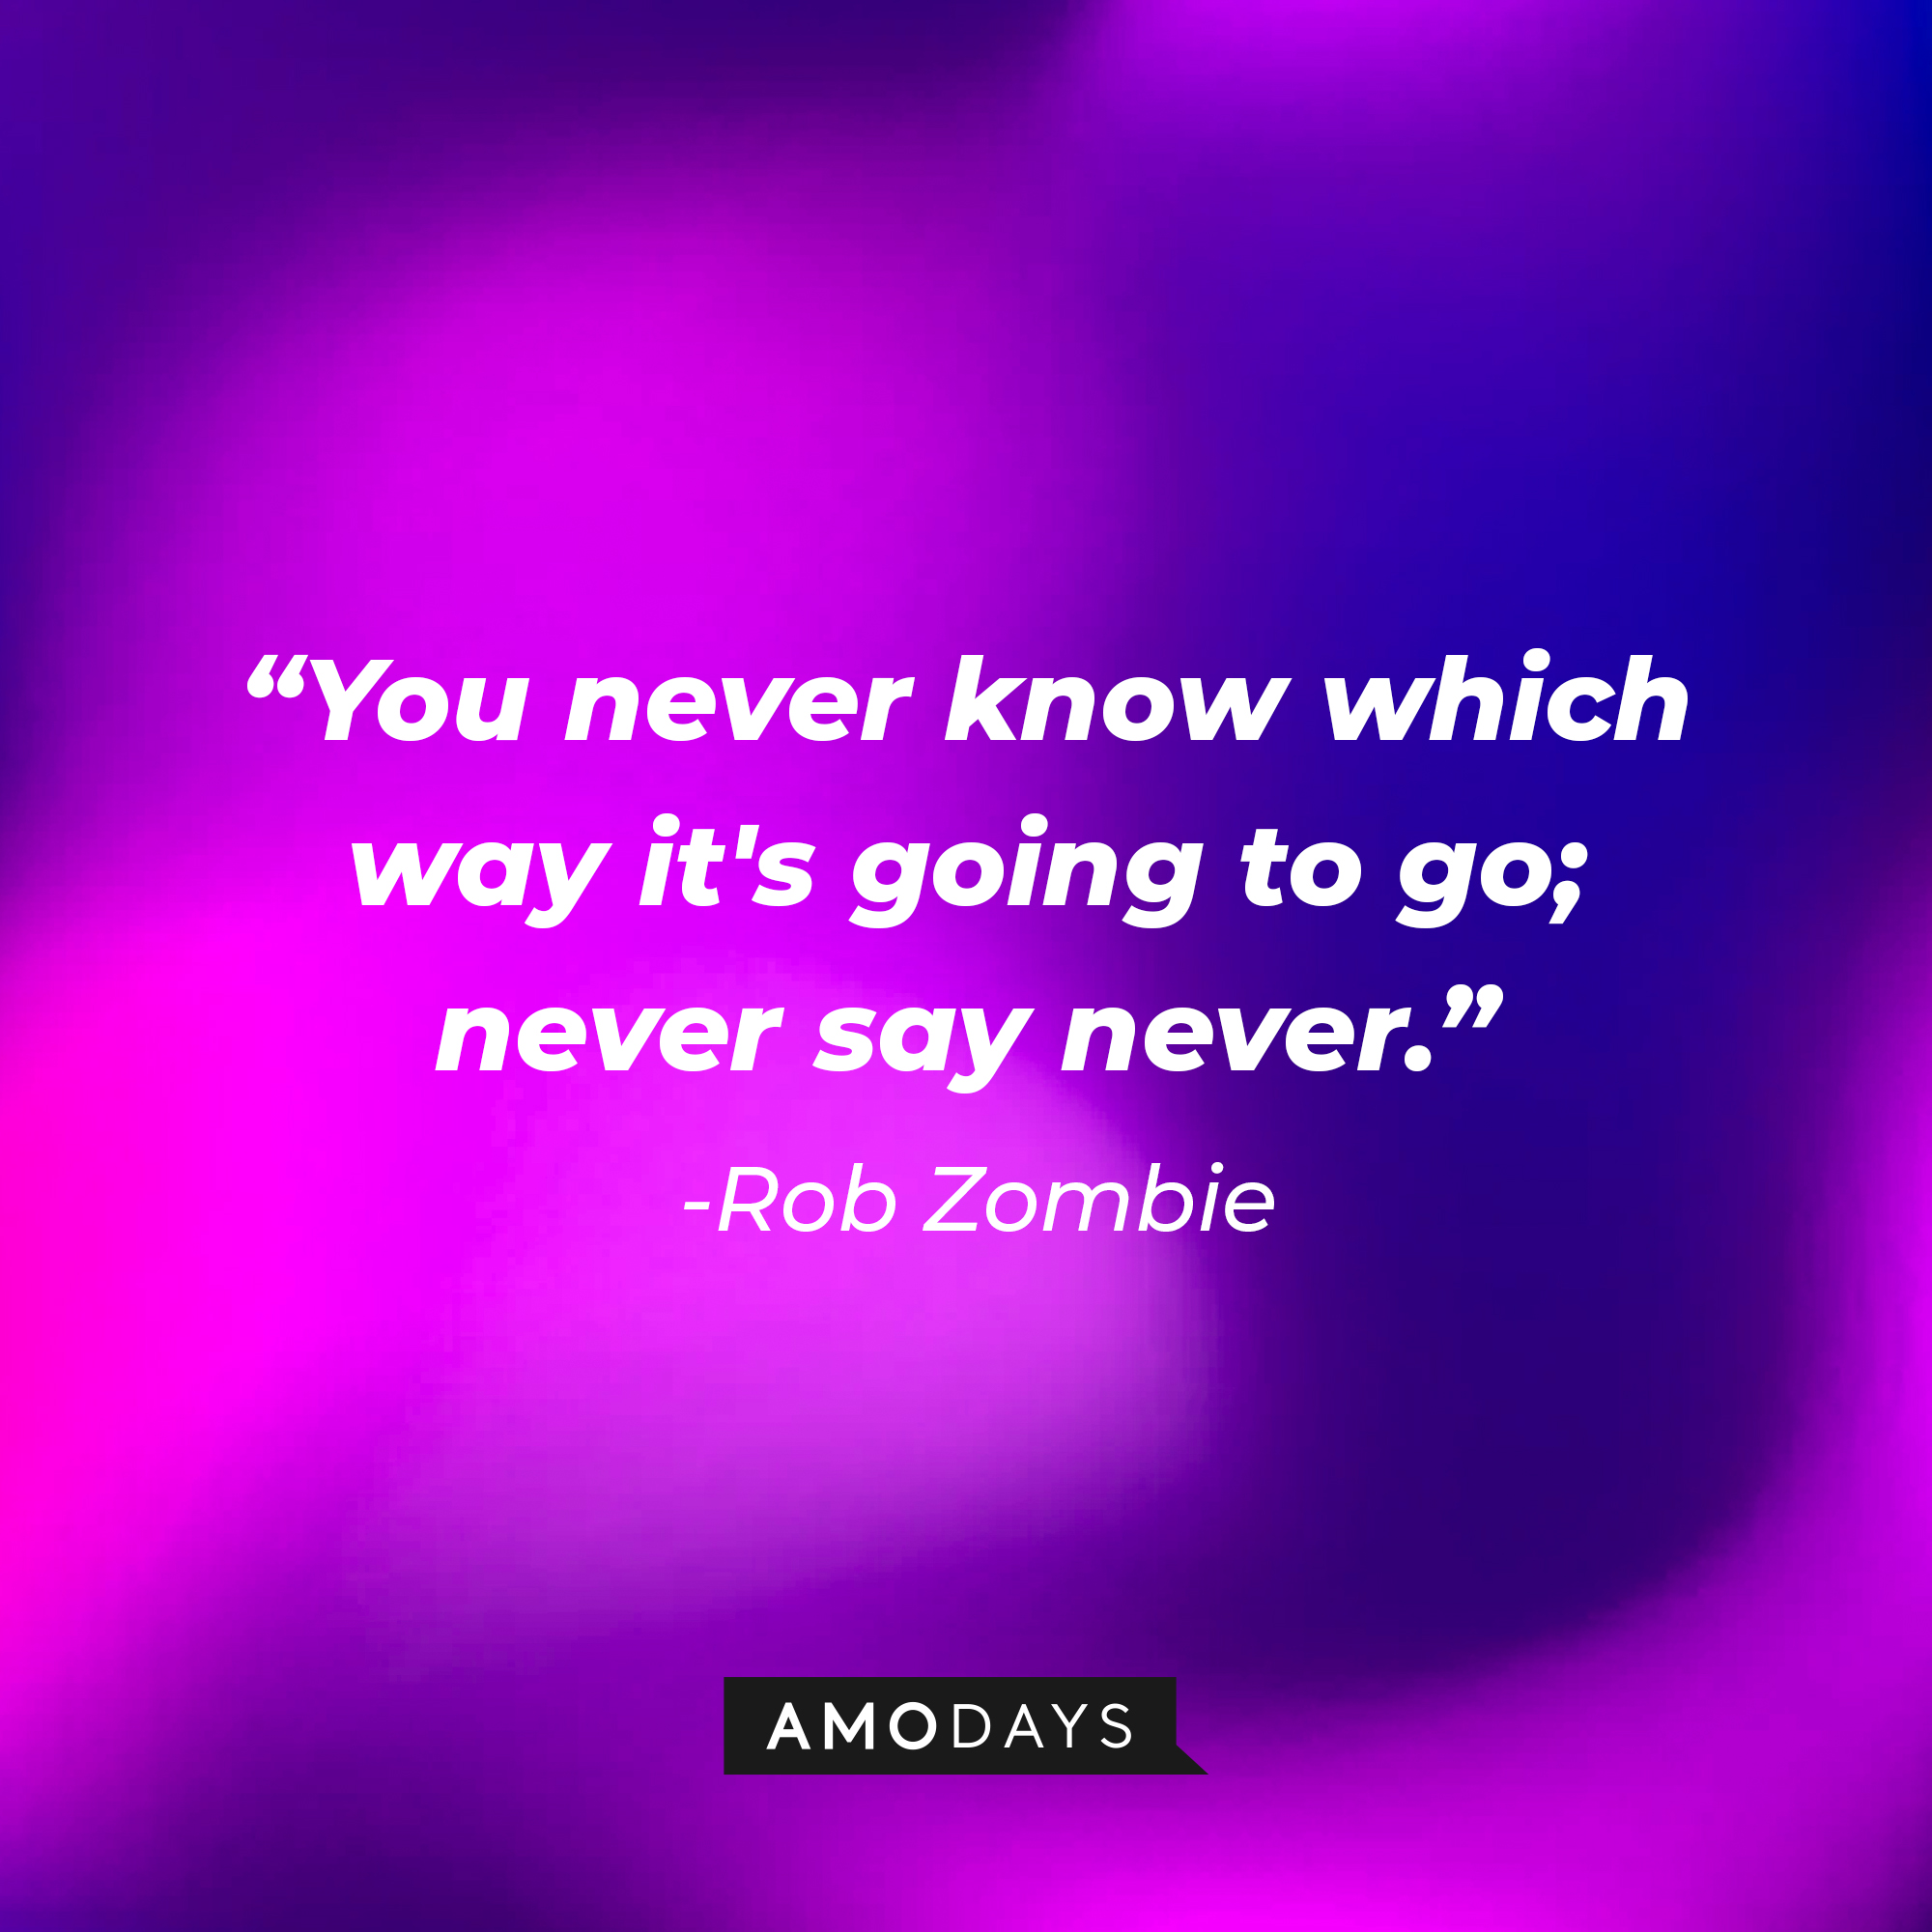 Rob Zombie's quote "You never know which way it's going to go; never say never." | Source: AmoDays